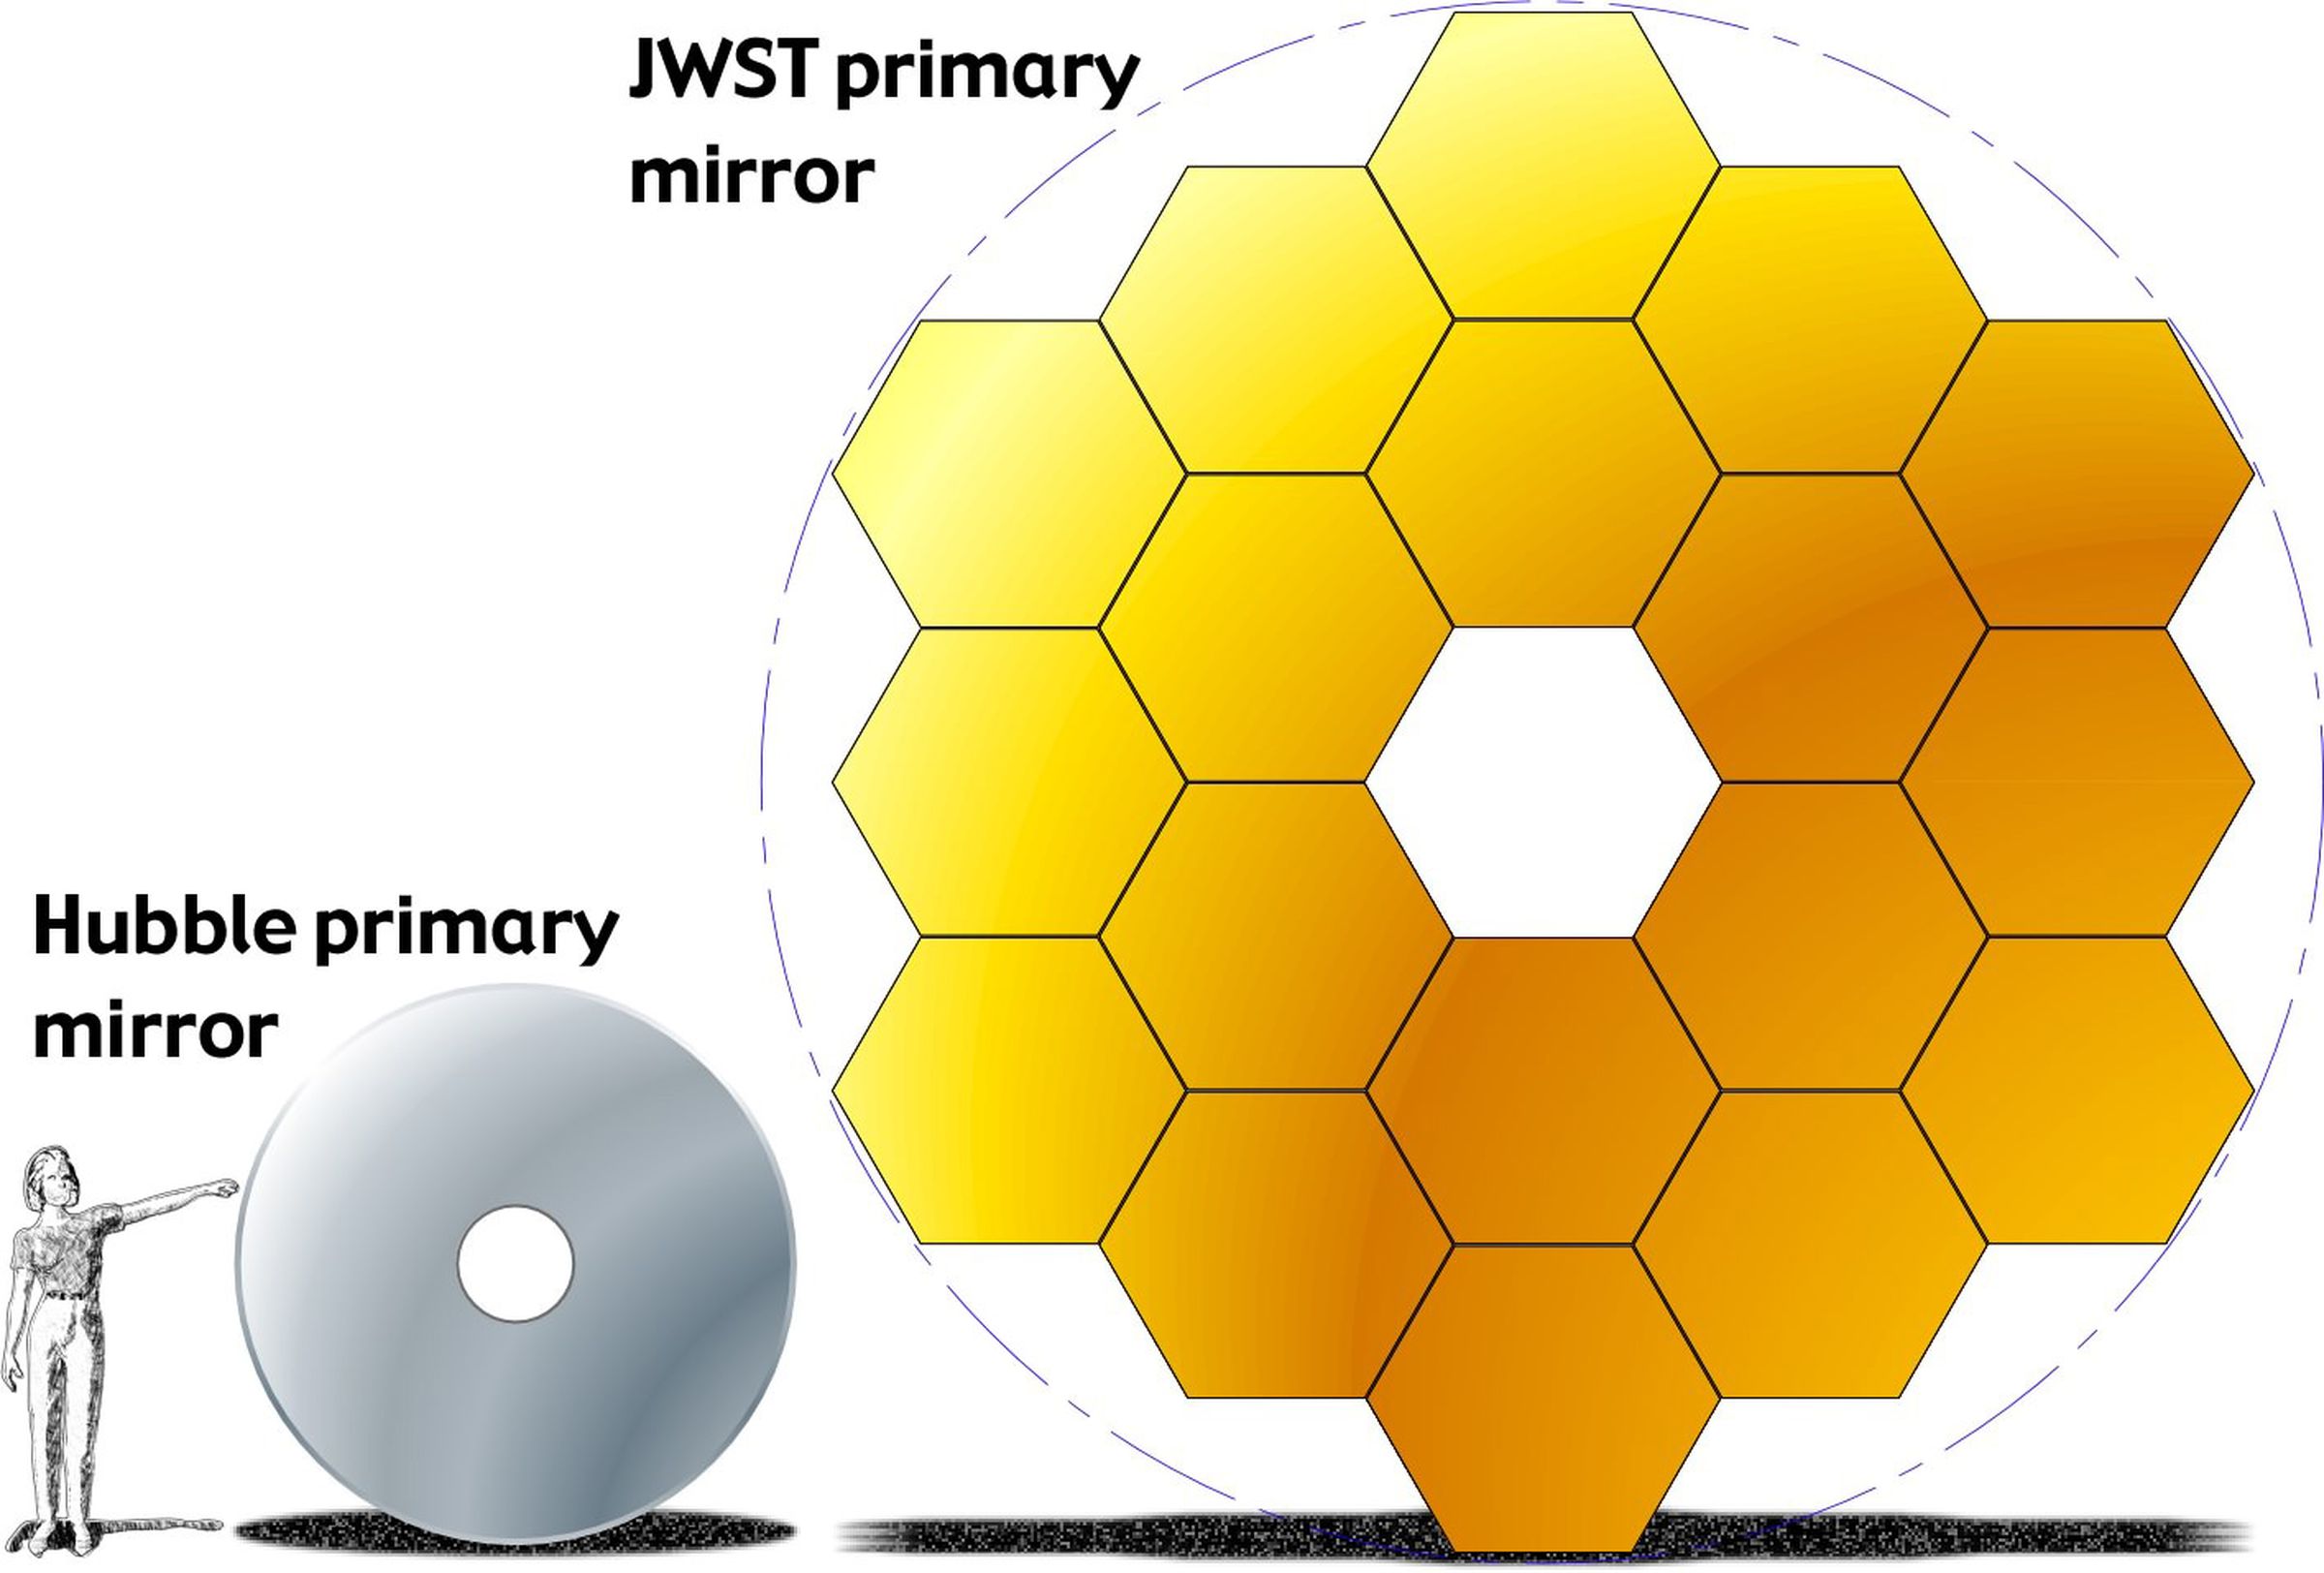 an illustration of a person standing next to the round, silvery hubble mirror. to the left is the much larger JWST primary mirror